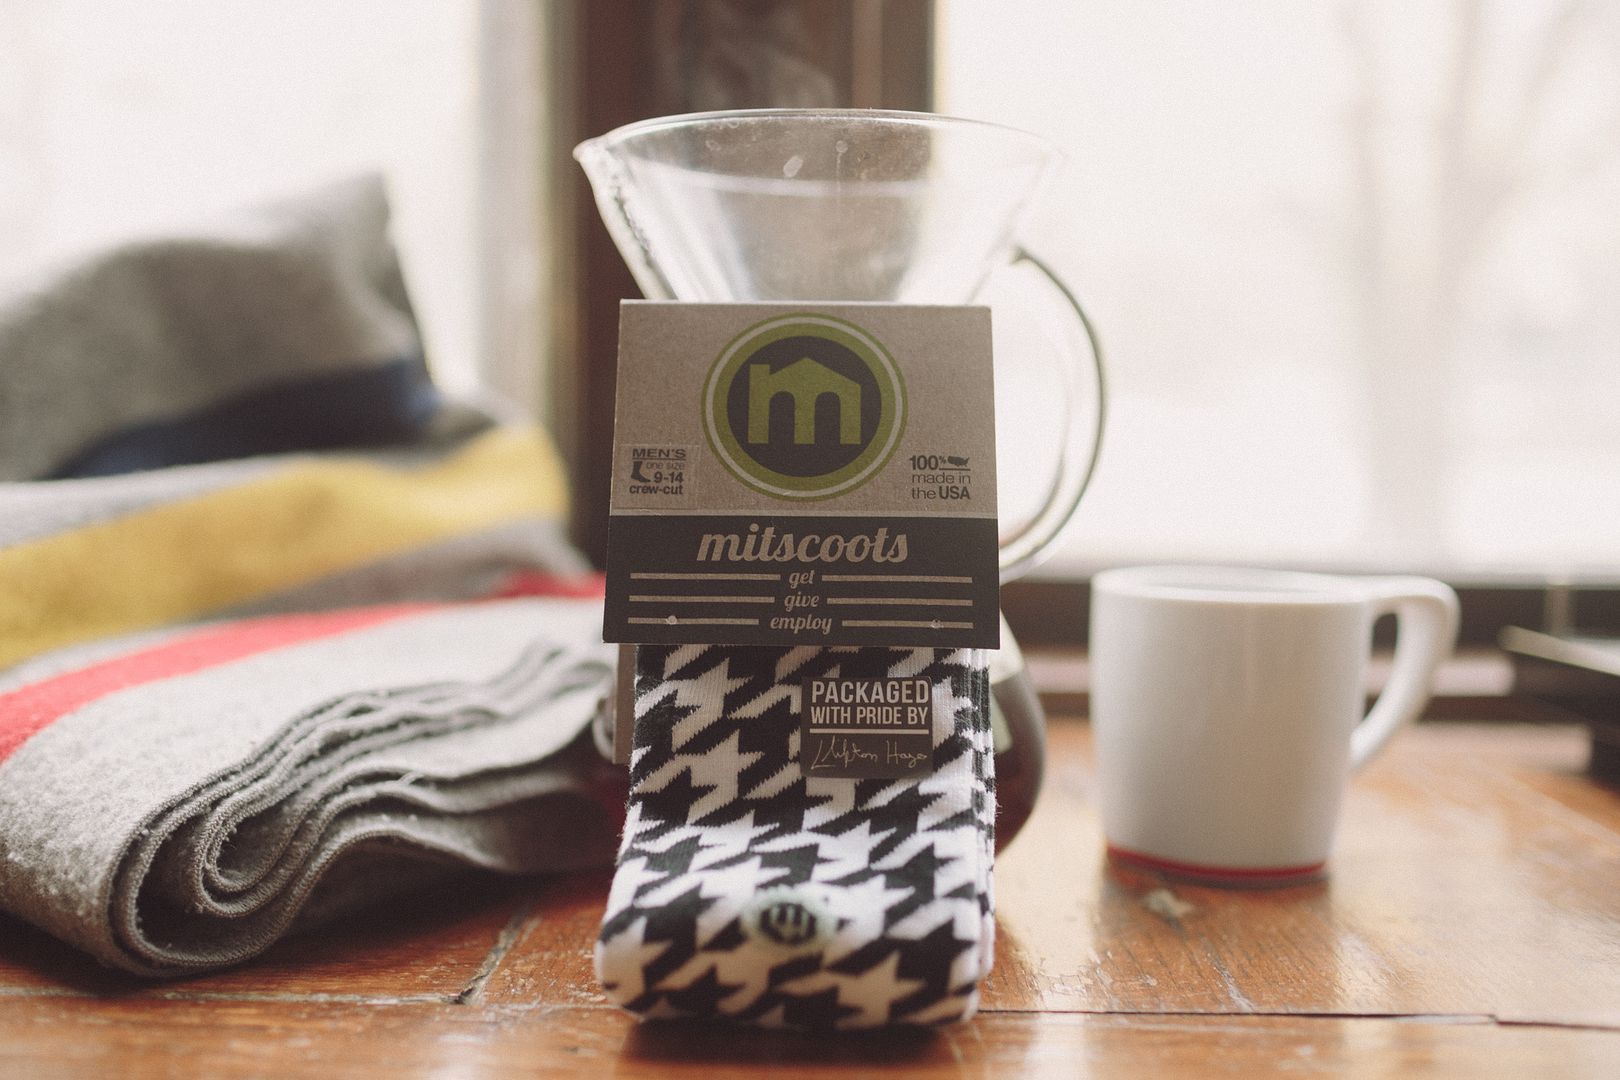 Mitscoots socks: Affordable gifts that give back